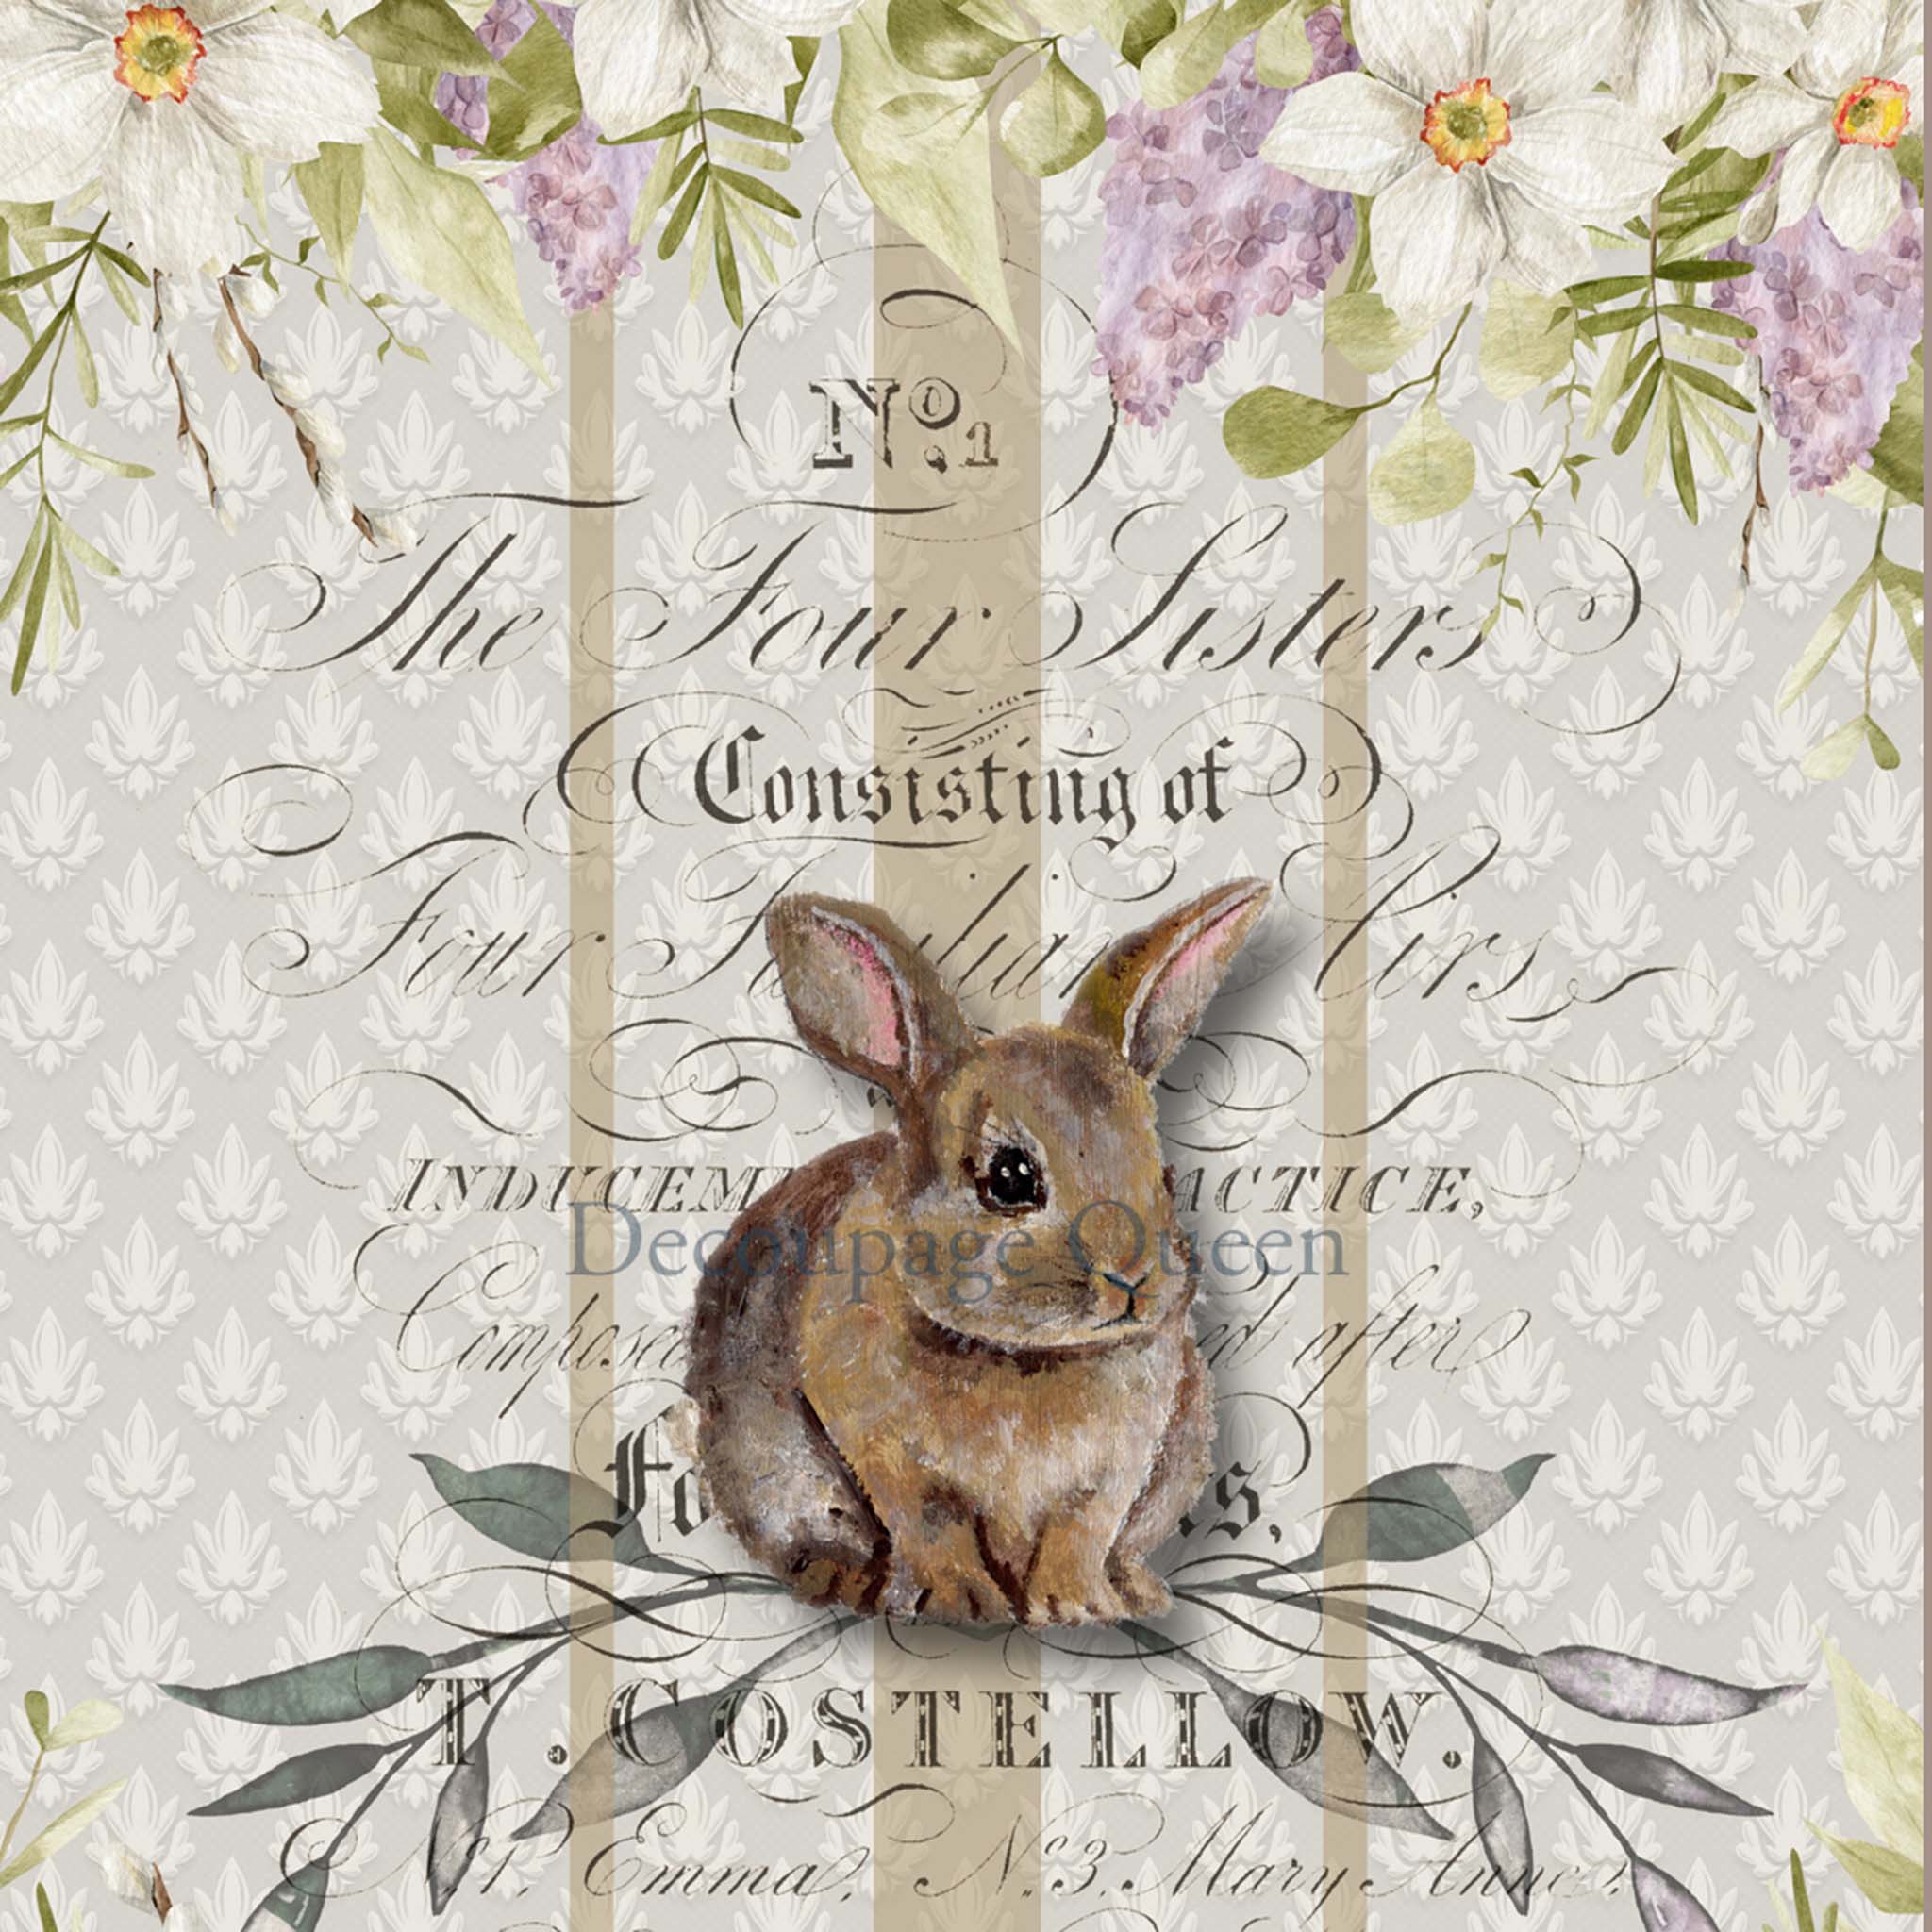 Close-up of an A3 rice paper design that features a charming bunny surrounded by beautiful flowers and elegant script with a repeating flourish pattern in the background.